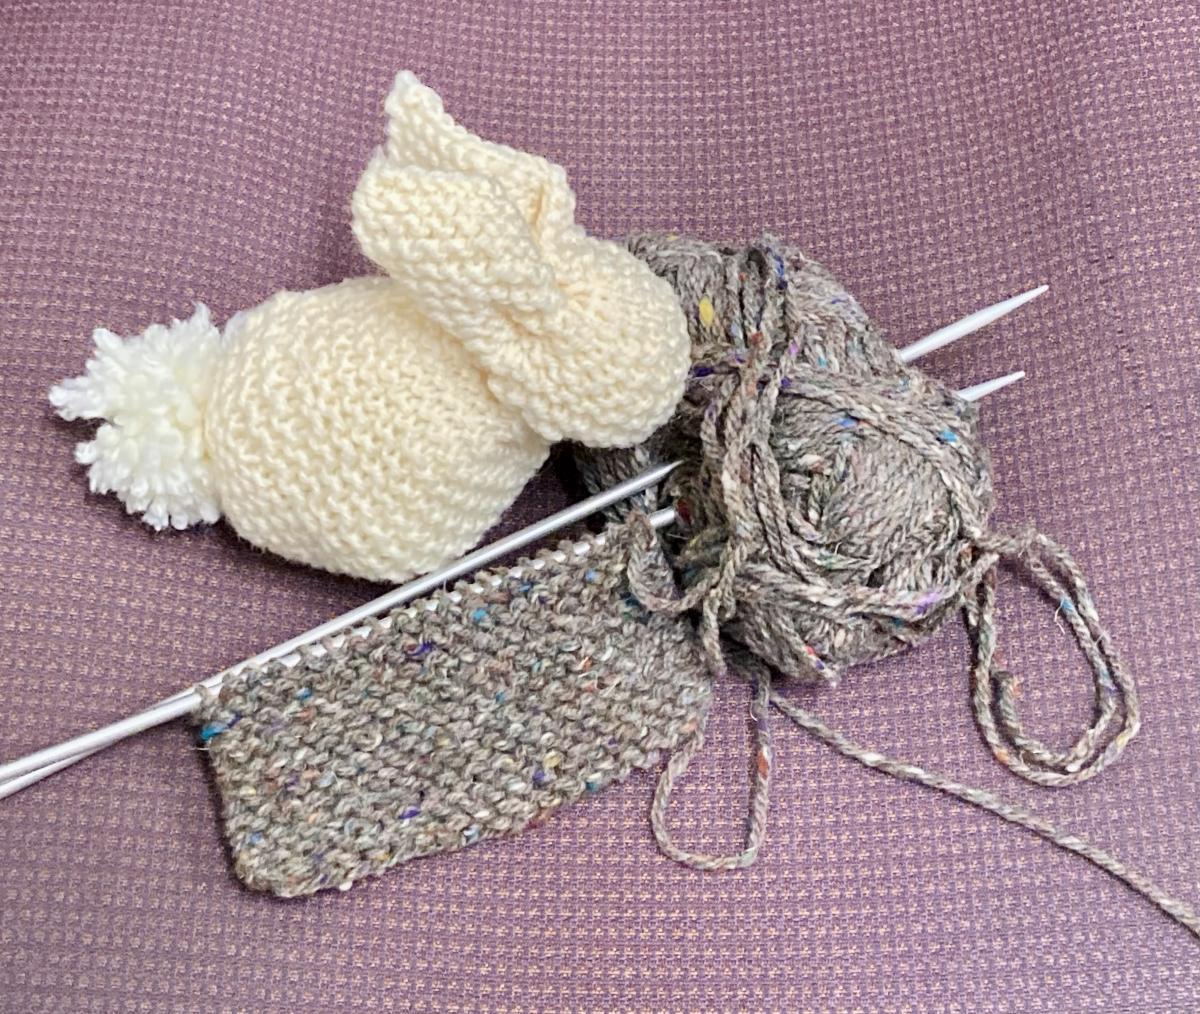 A cream colored knit bunny sits next to a knitting project on a pair of needles stabbed into gray yarn.